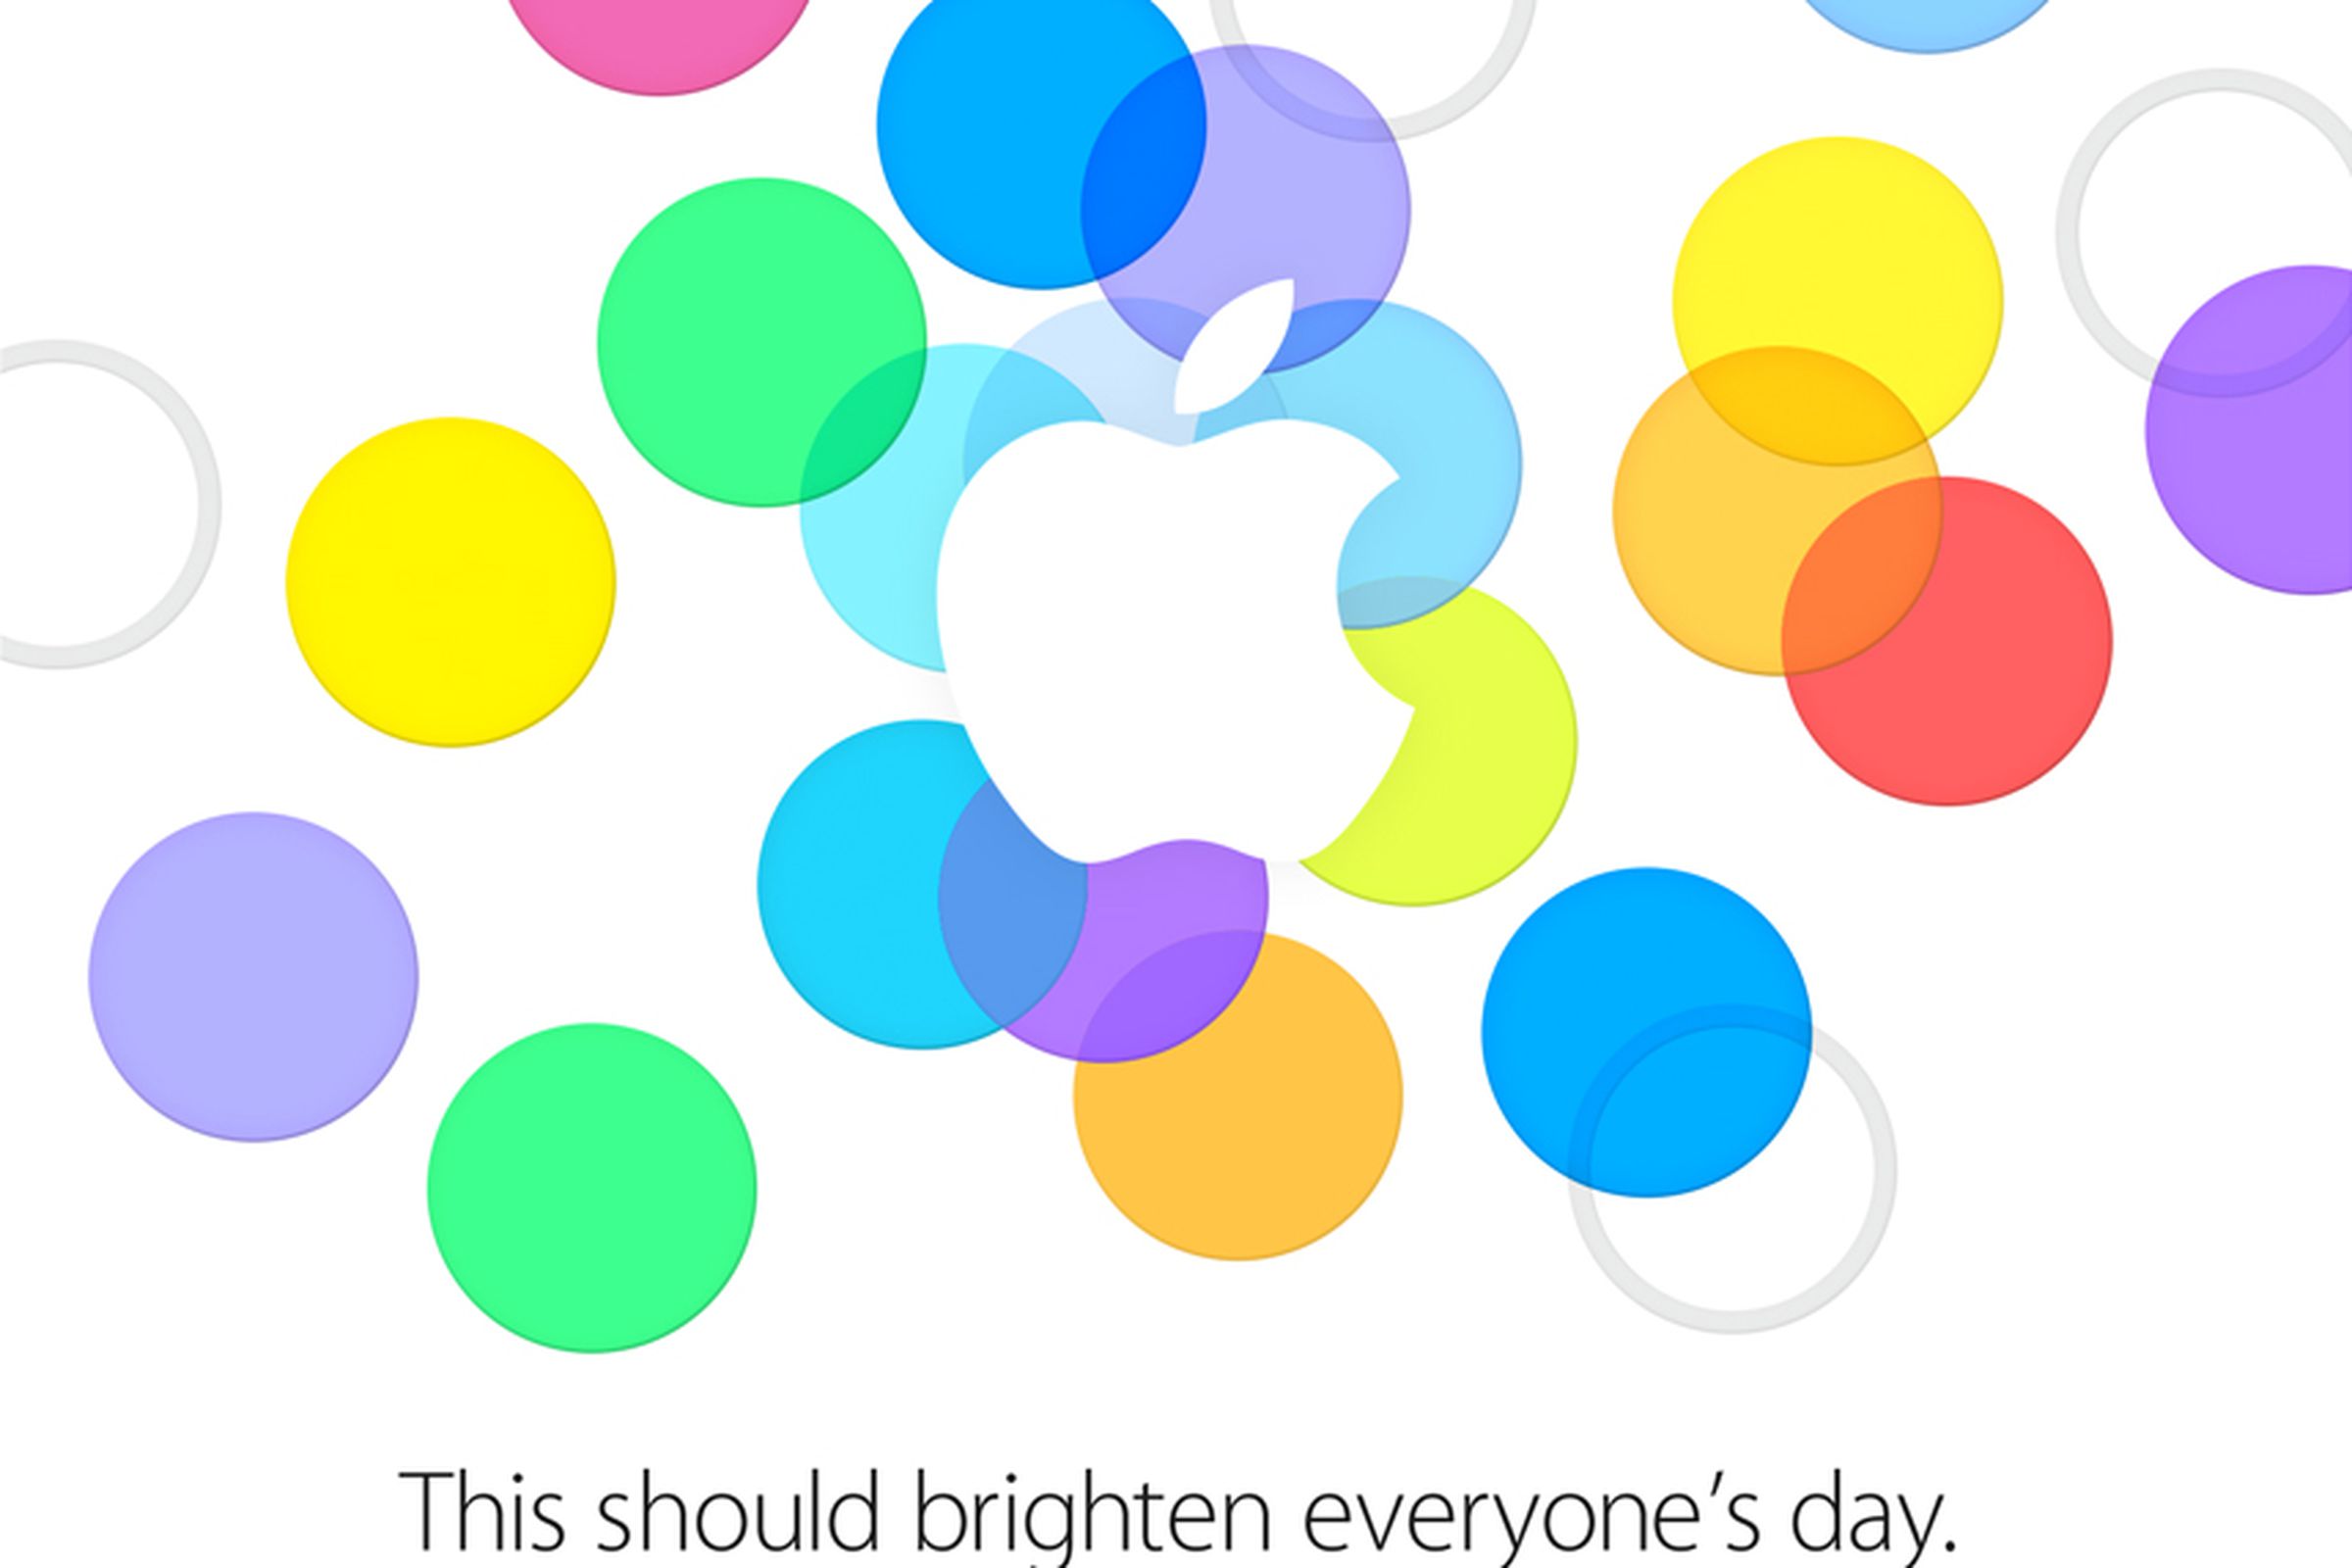 Colorful dots scattered behind the Apple logo.